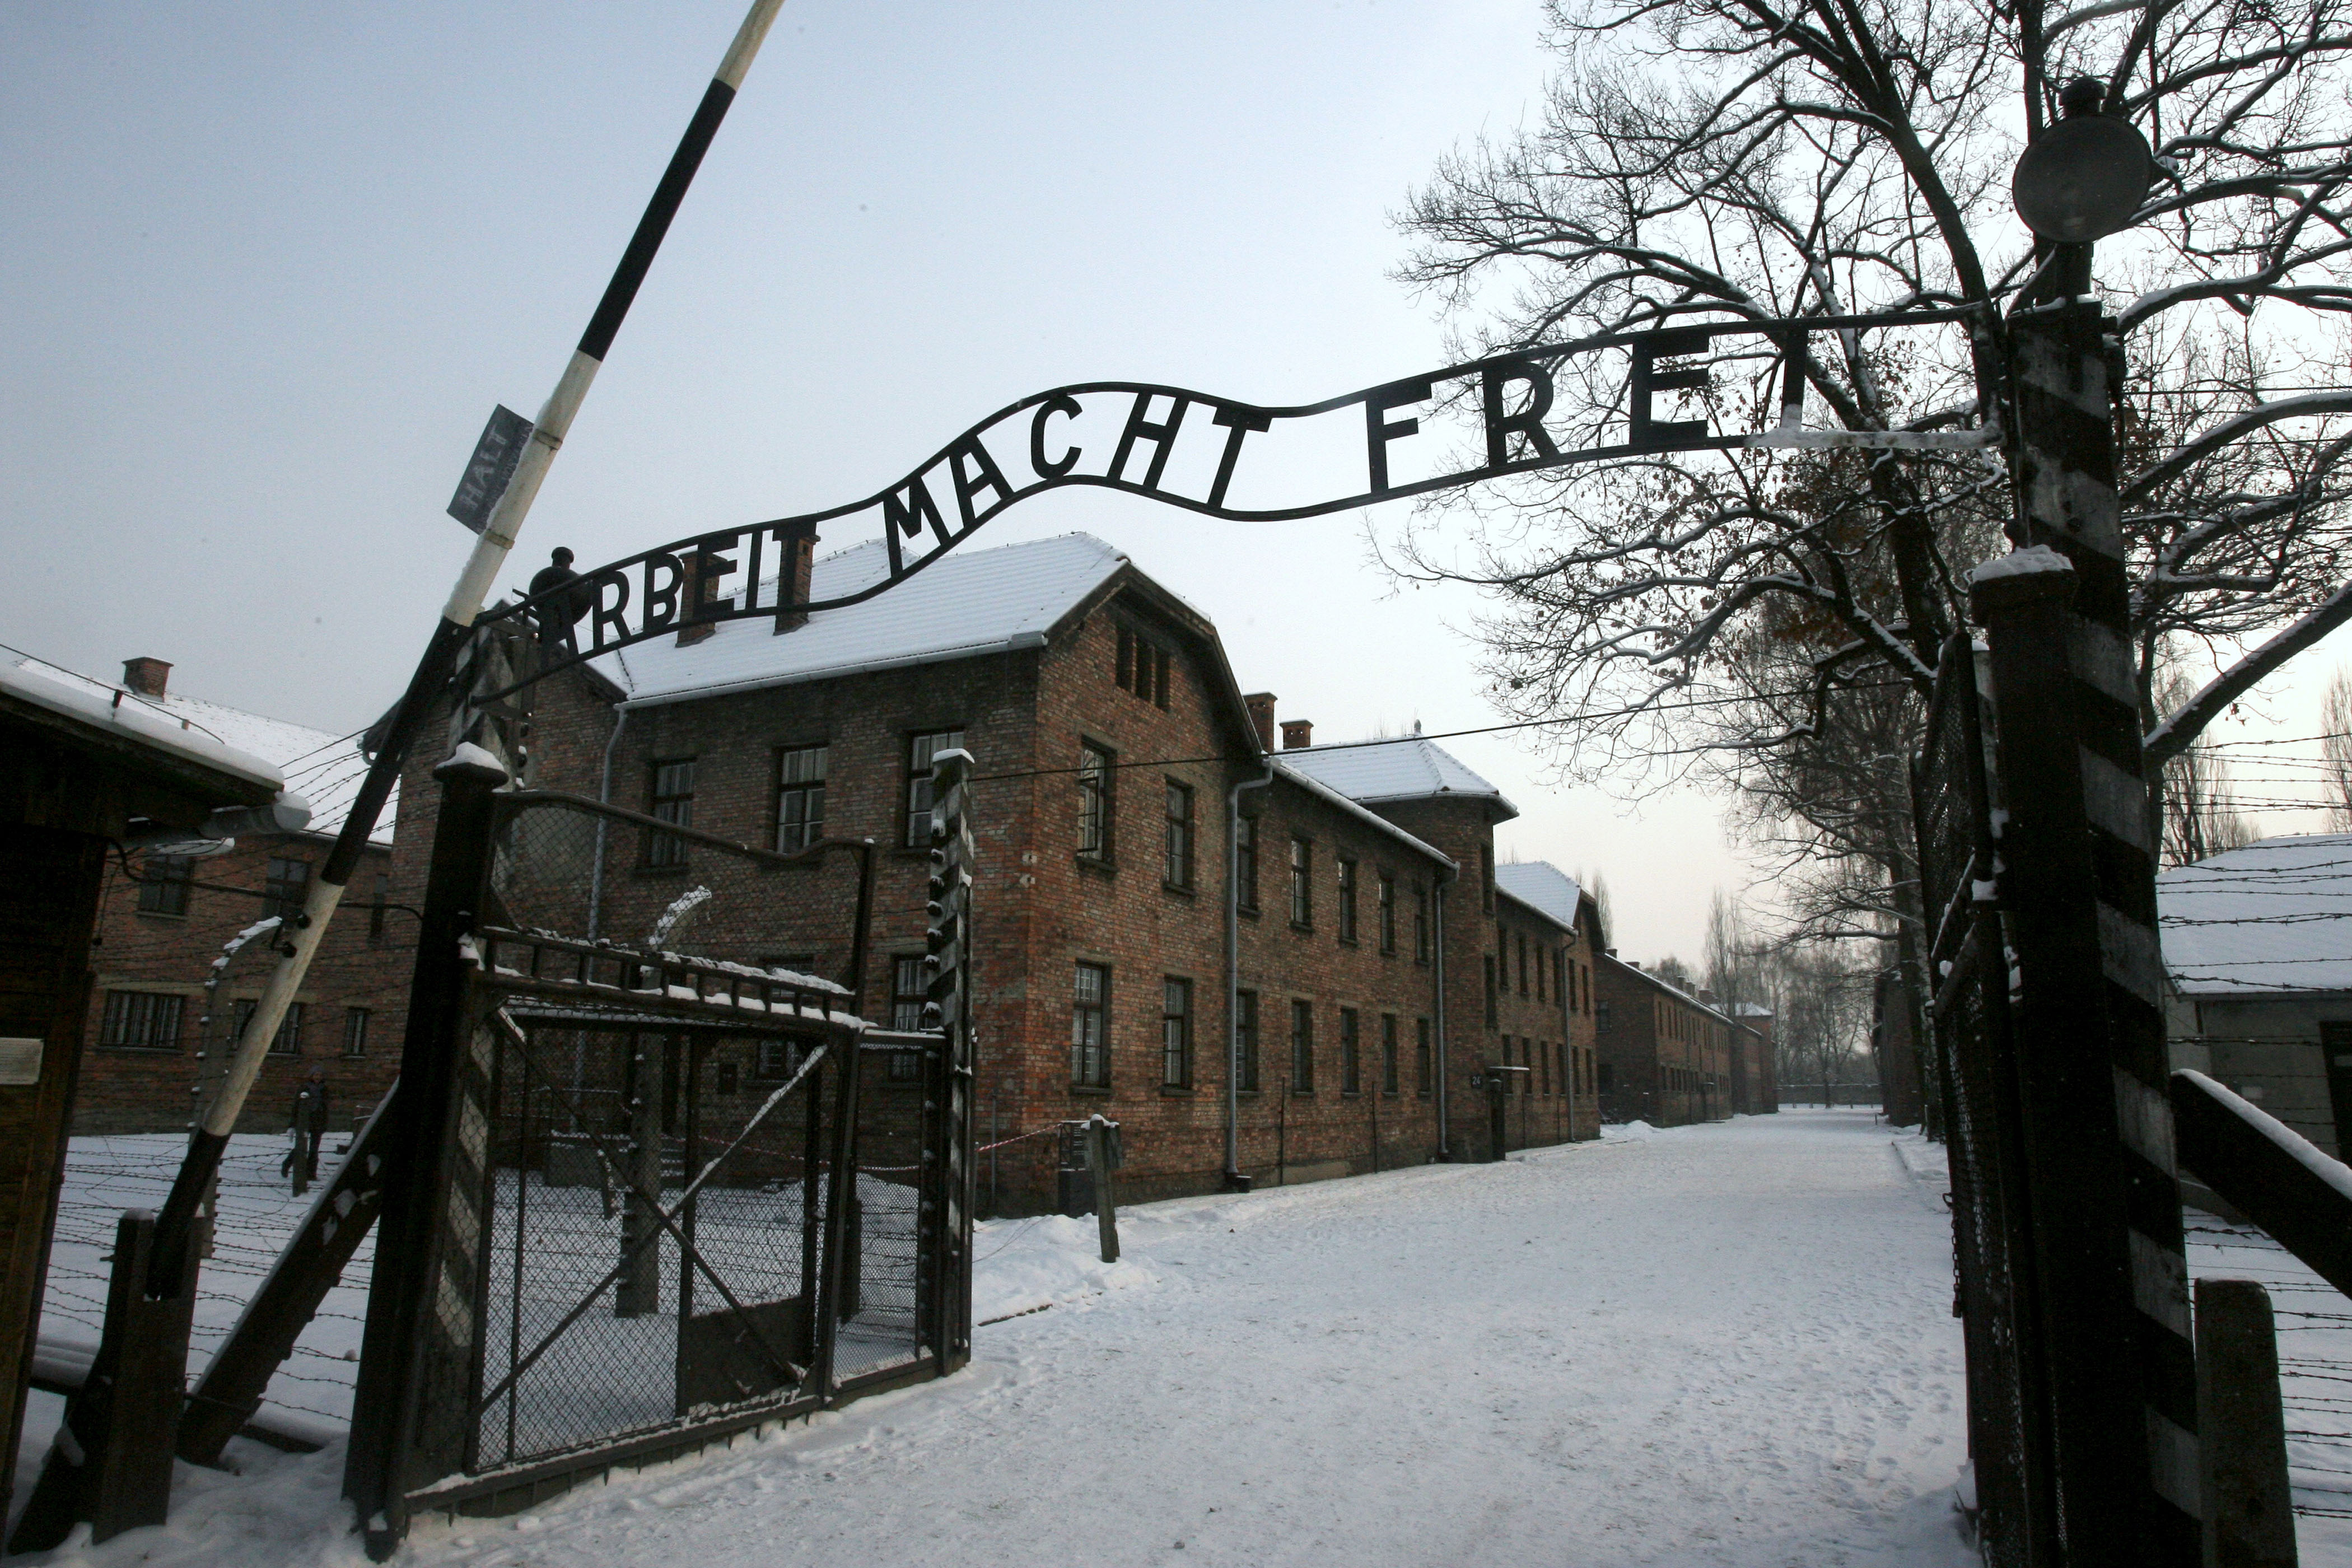 A replica hung in place of the stolen infamous "Arbeit macht frei" sign at the former Nazi death camp Auschwitz in Oswiecim, Poland on Dec. 18, 2009. (Jacek Bednarczyk—AFP/Getty Images)